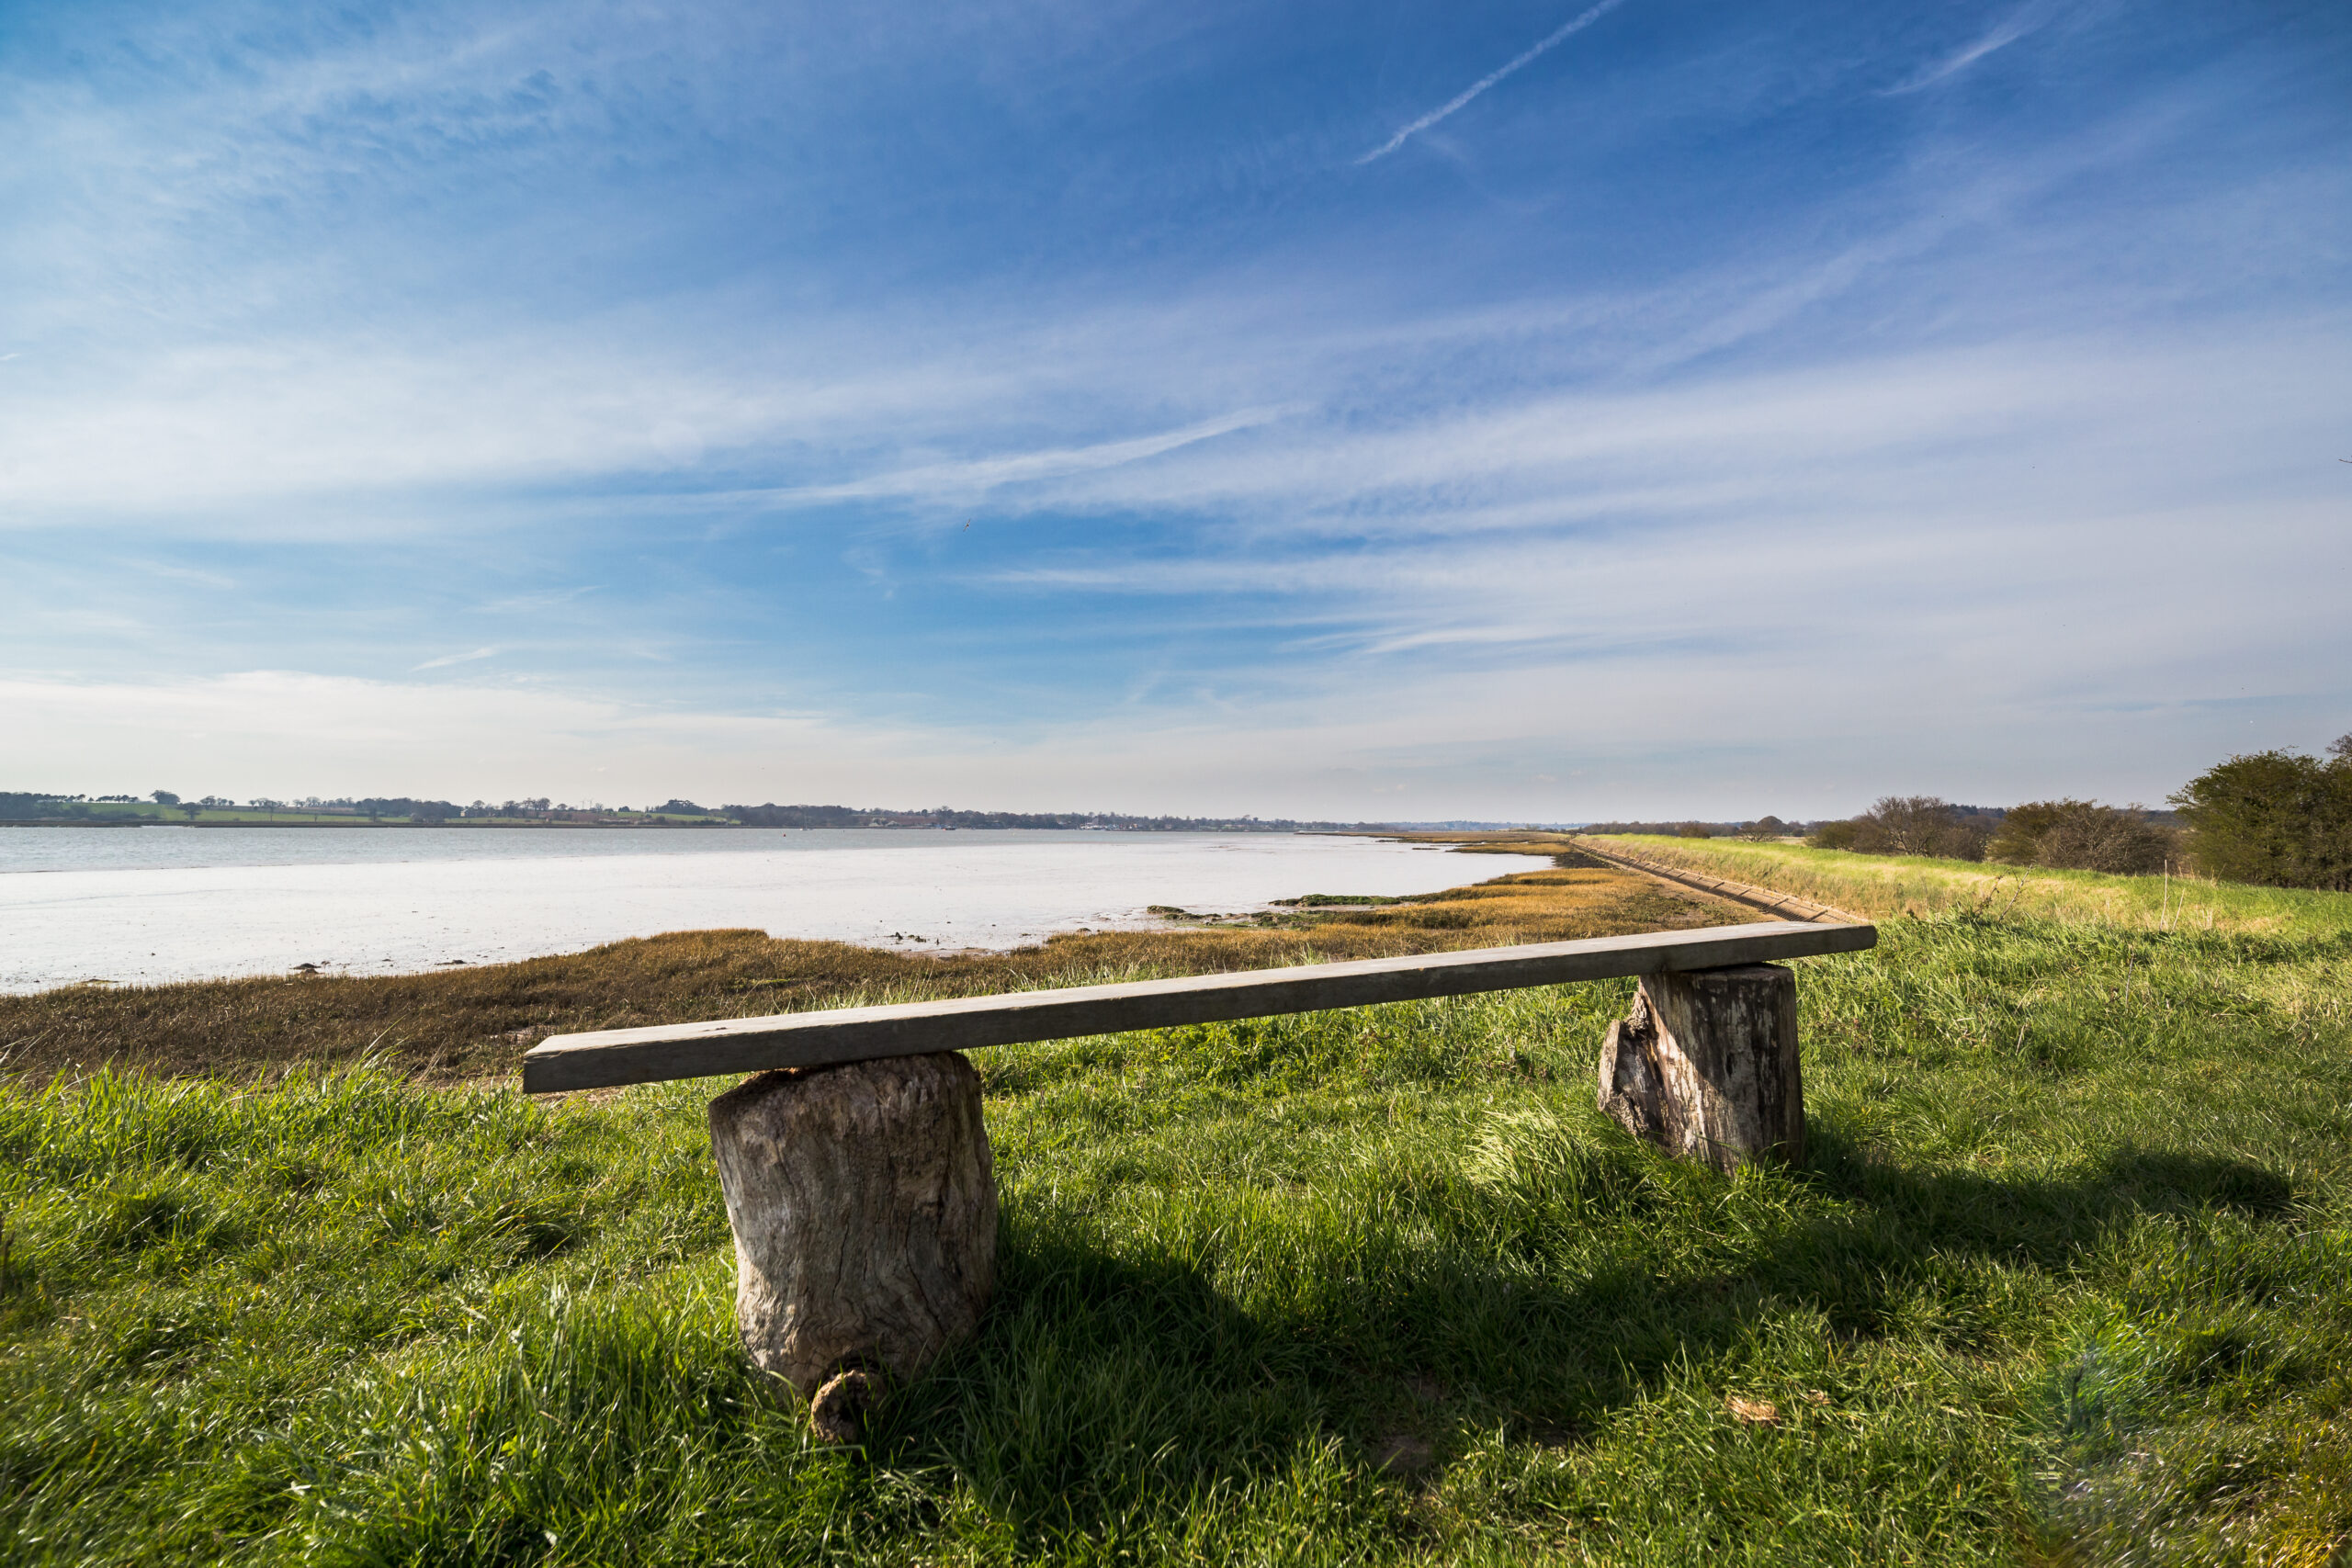 Stone and wooden bench by the Suffolk coastline